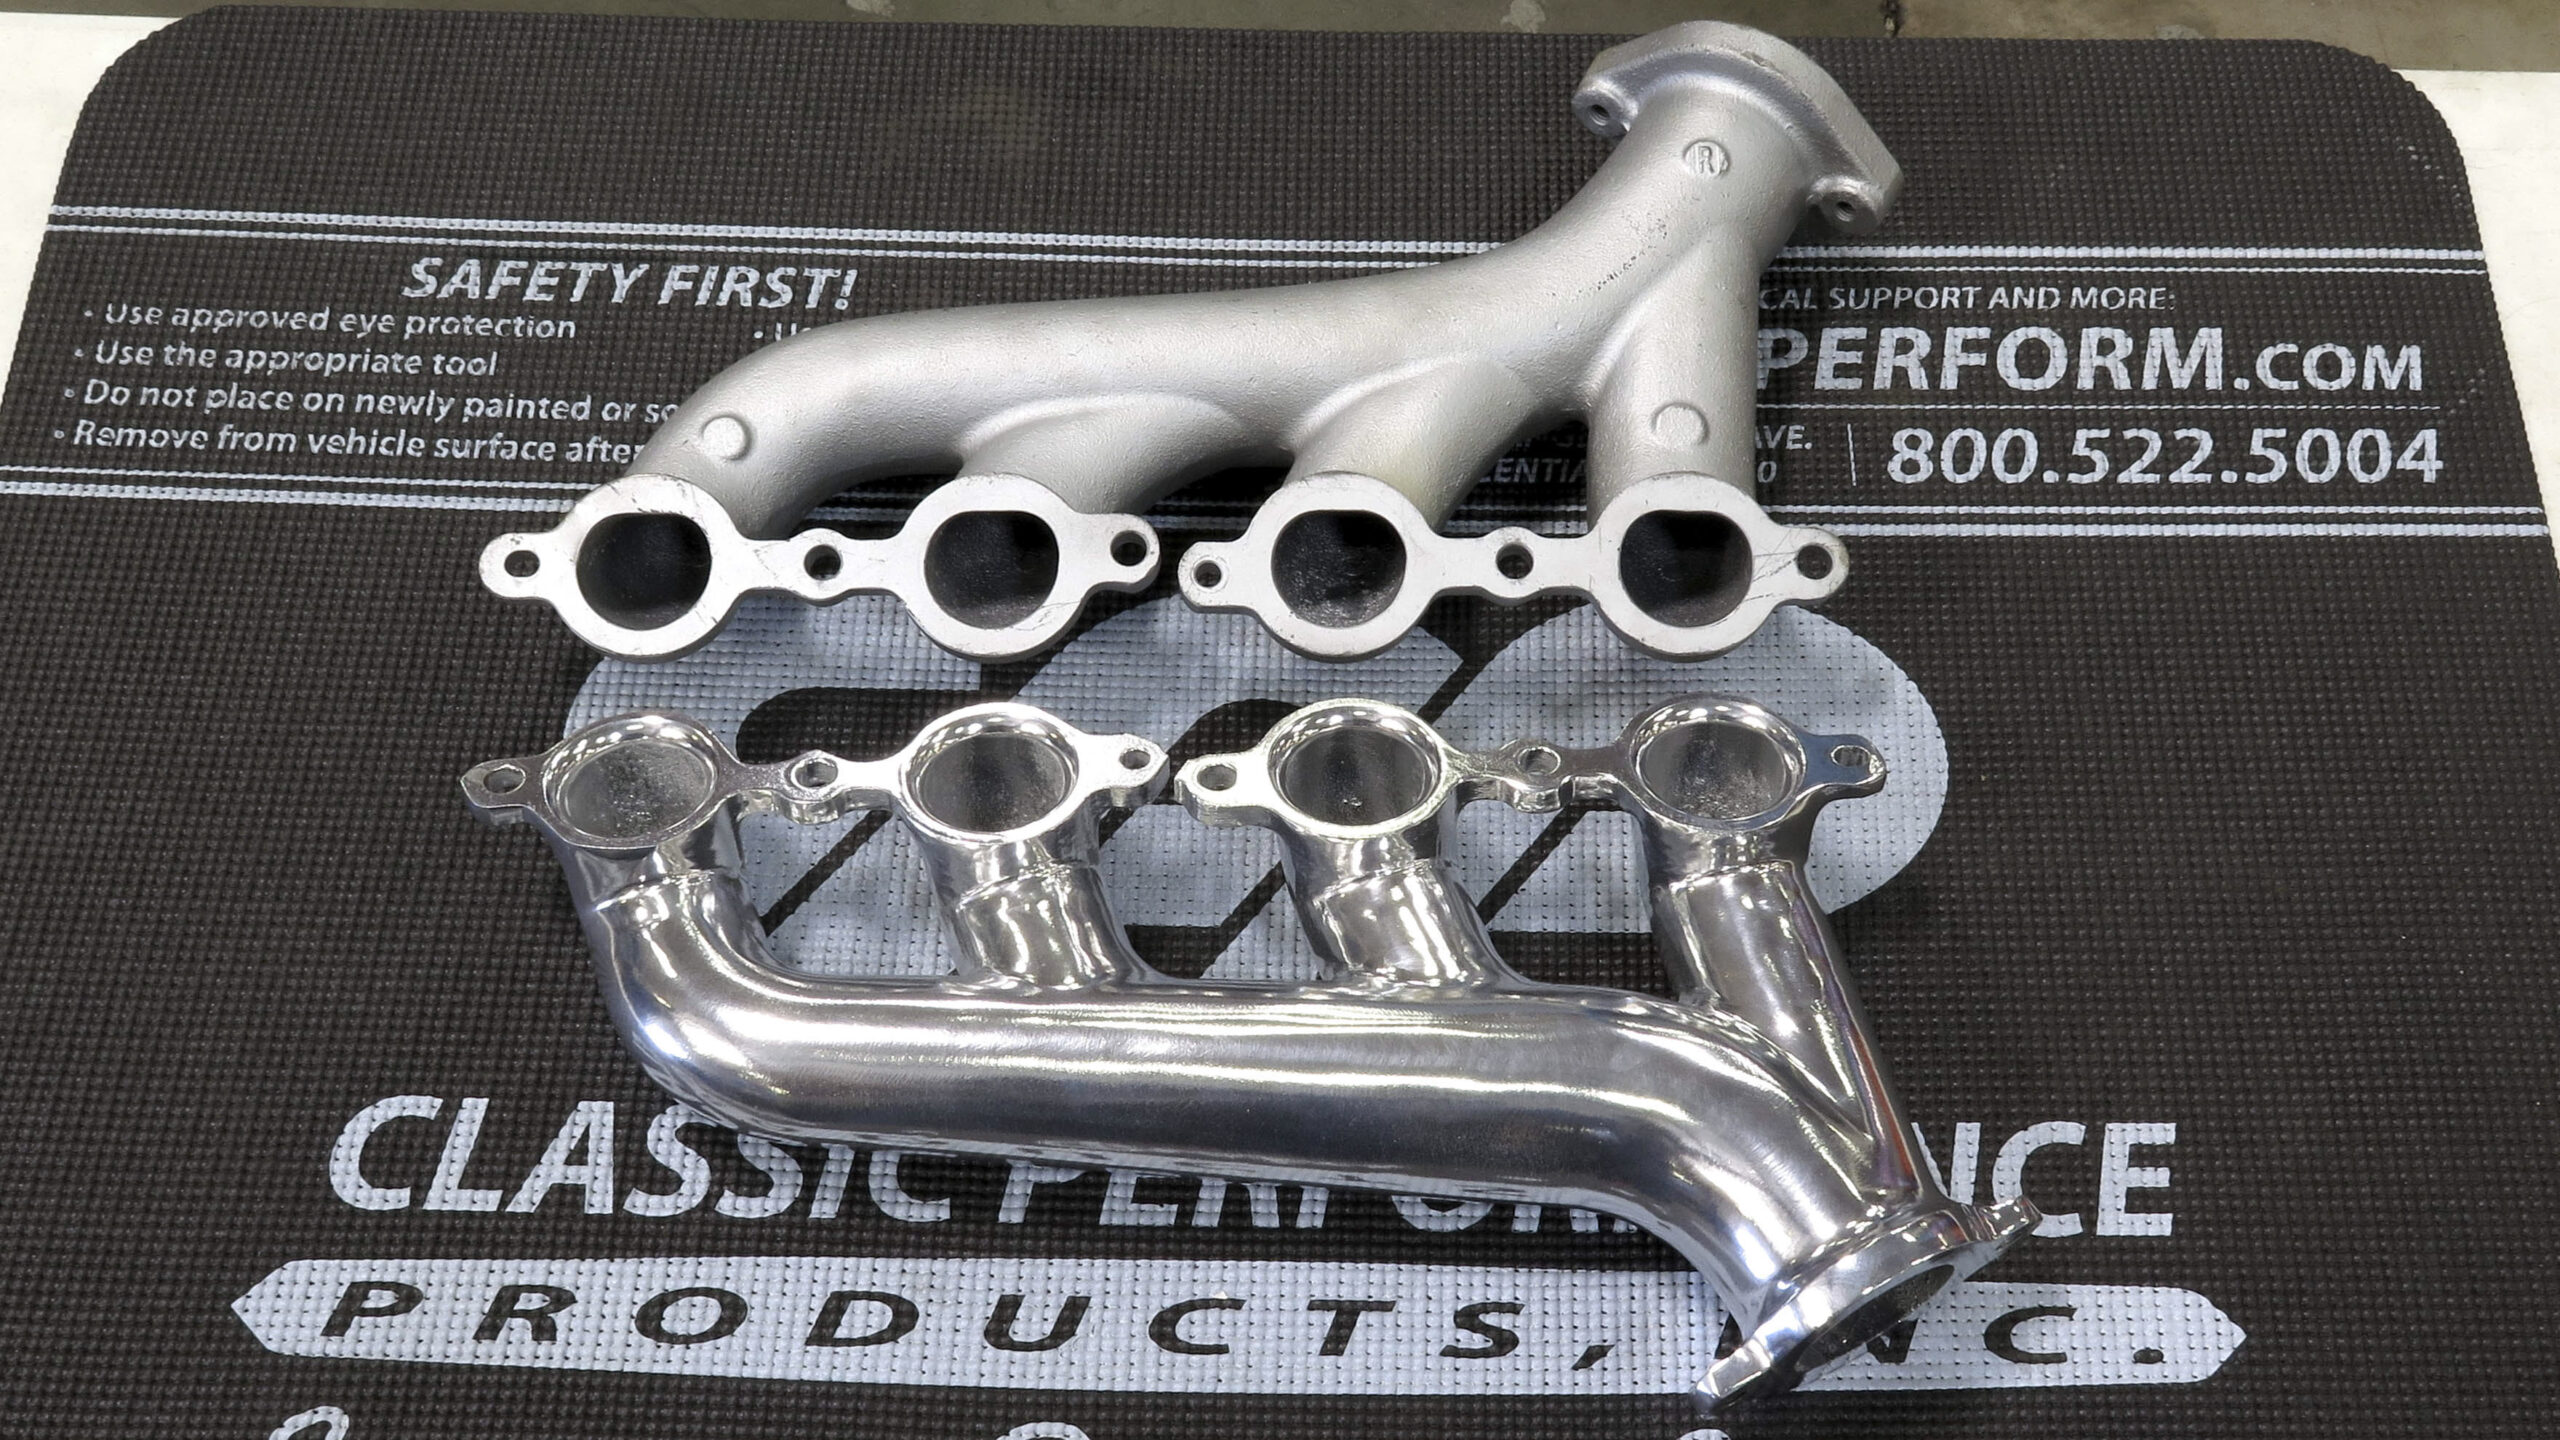 CPP Cast Iron LS Exhaust Manifold vs other LS manifold